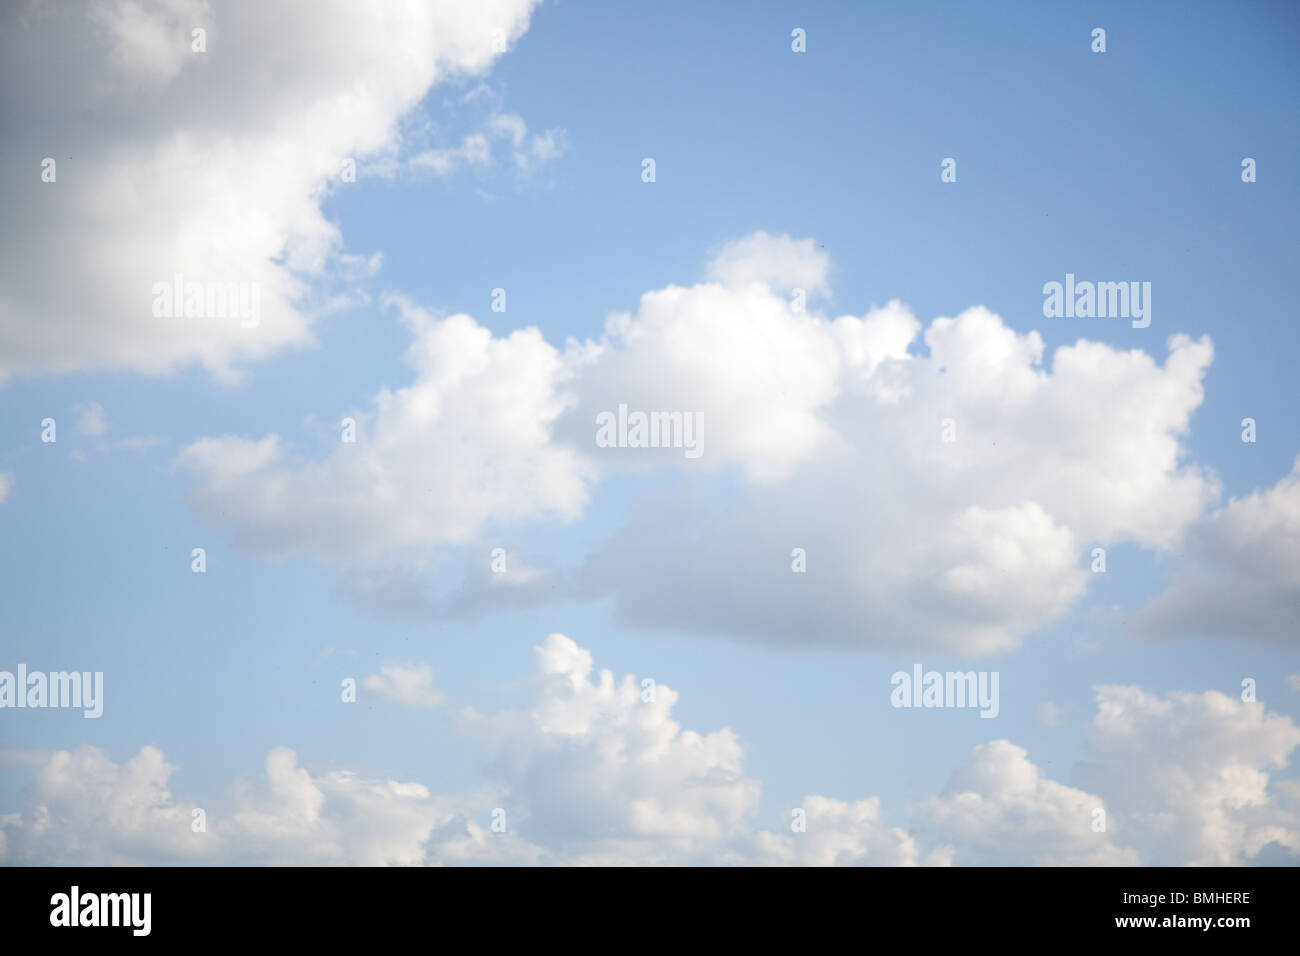 white clouds against a blue sky background, Hampshire, England. Stock Photo